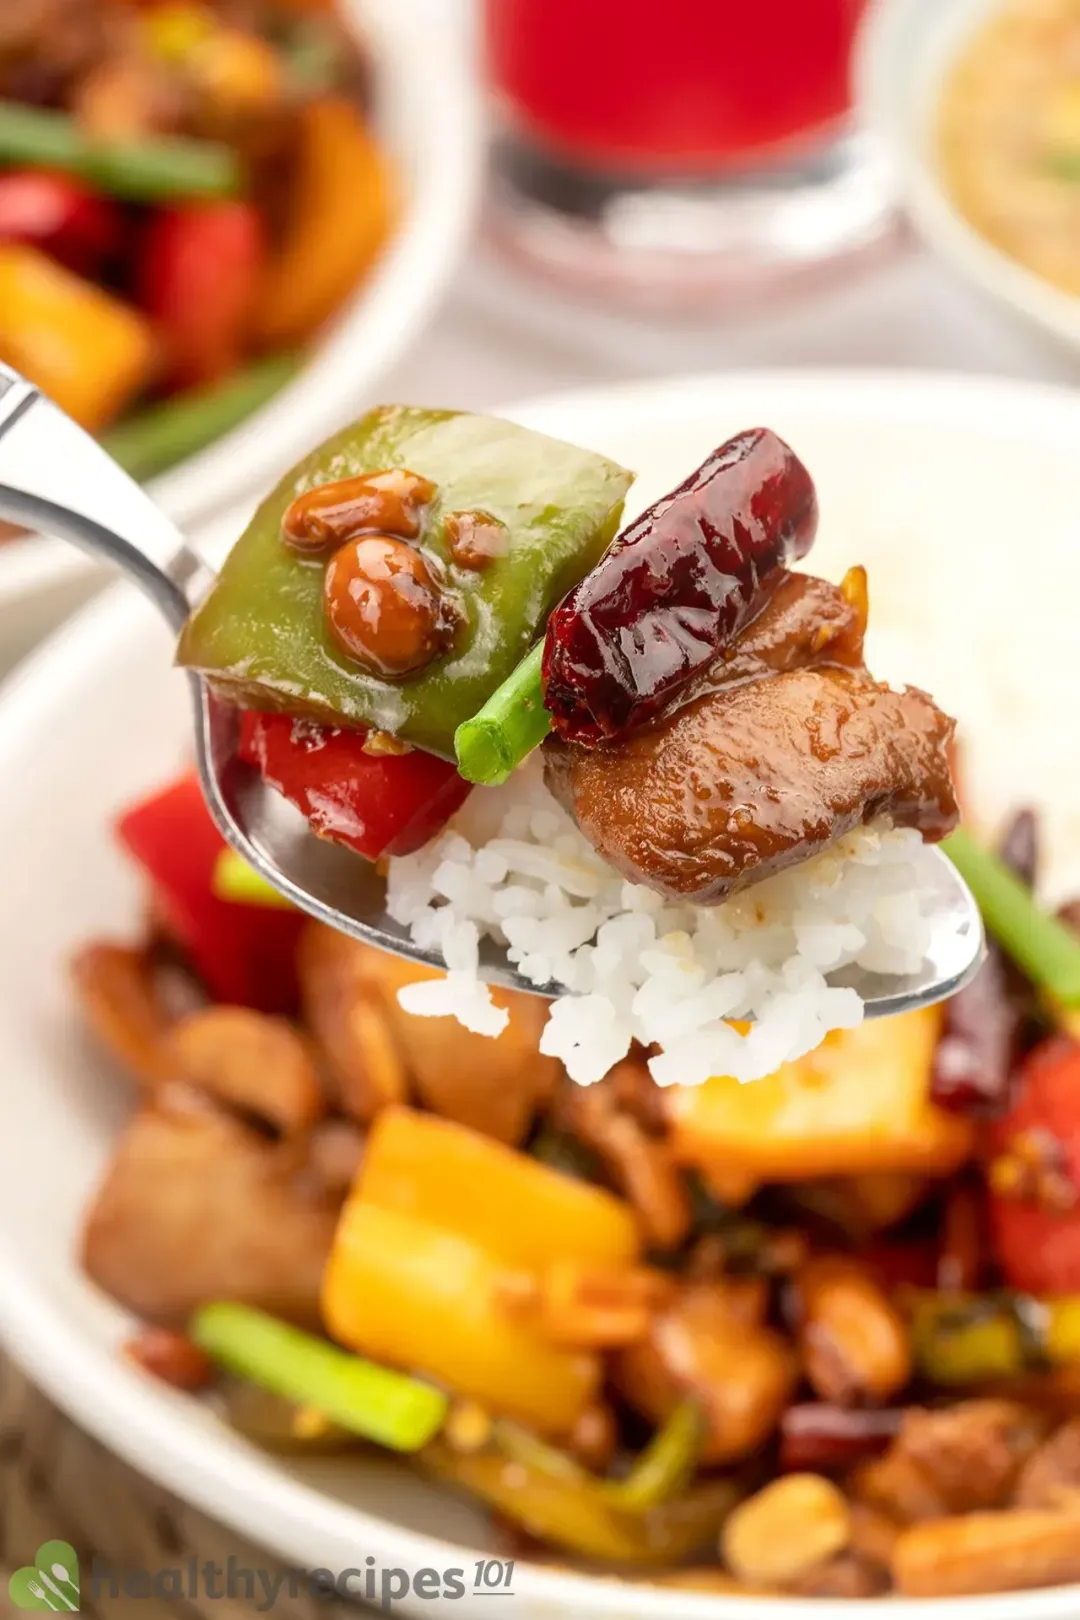 A spoon scooping up white rice, cicken cubes, dried chili, and diced bell pepper from a plate of kung pao chicken.